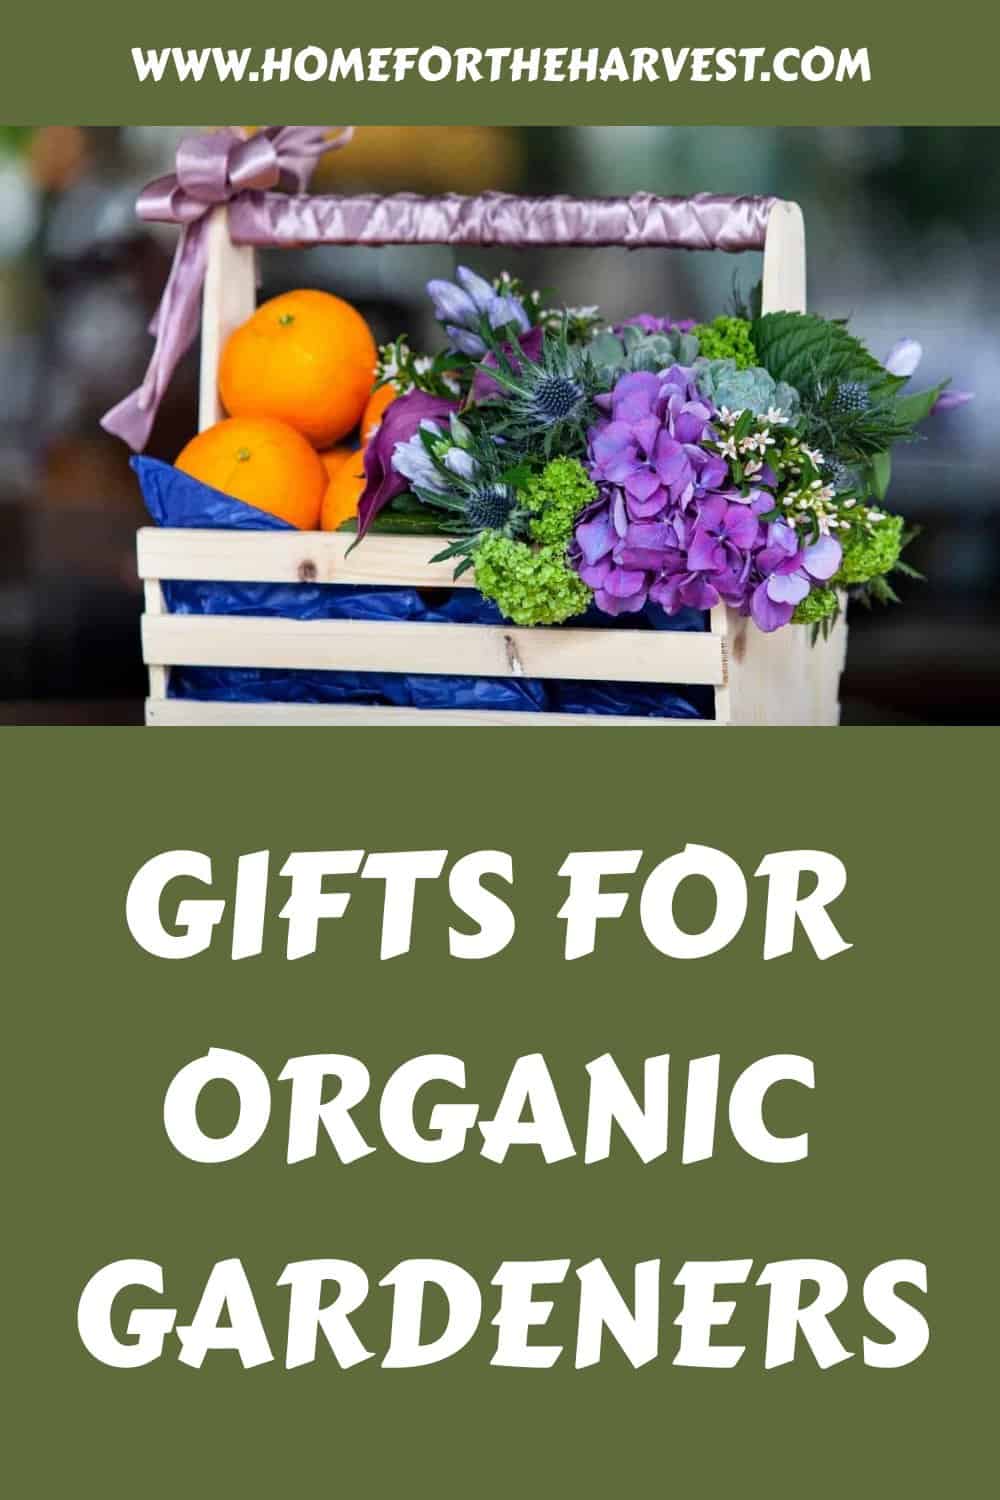 Gifts for organic gardeners generated pin 3155